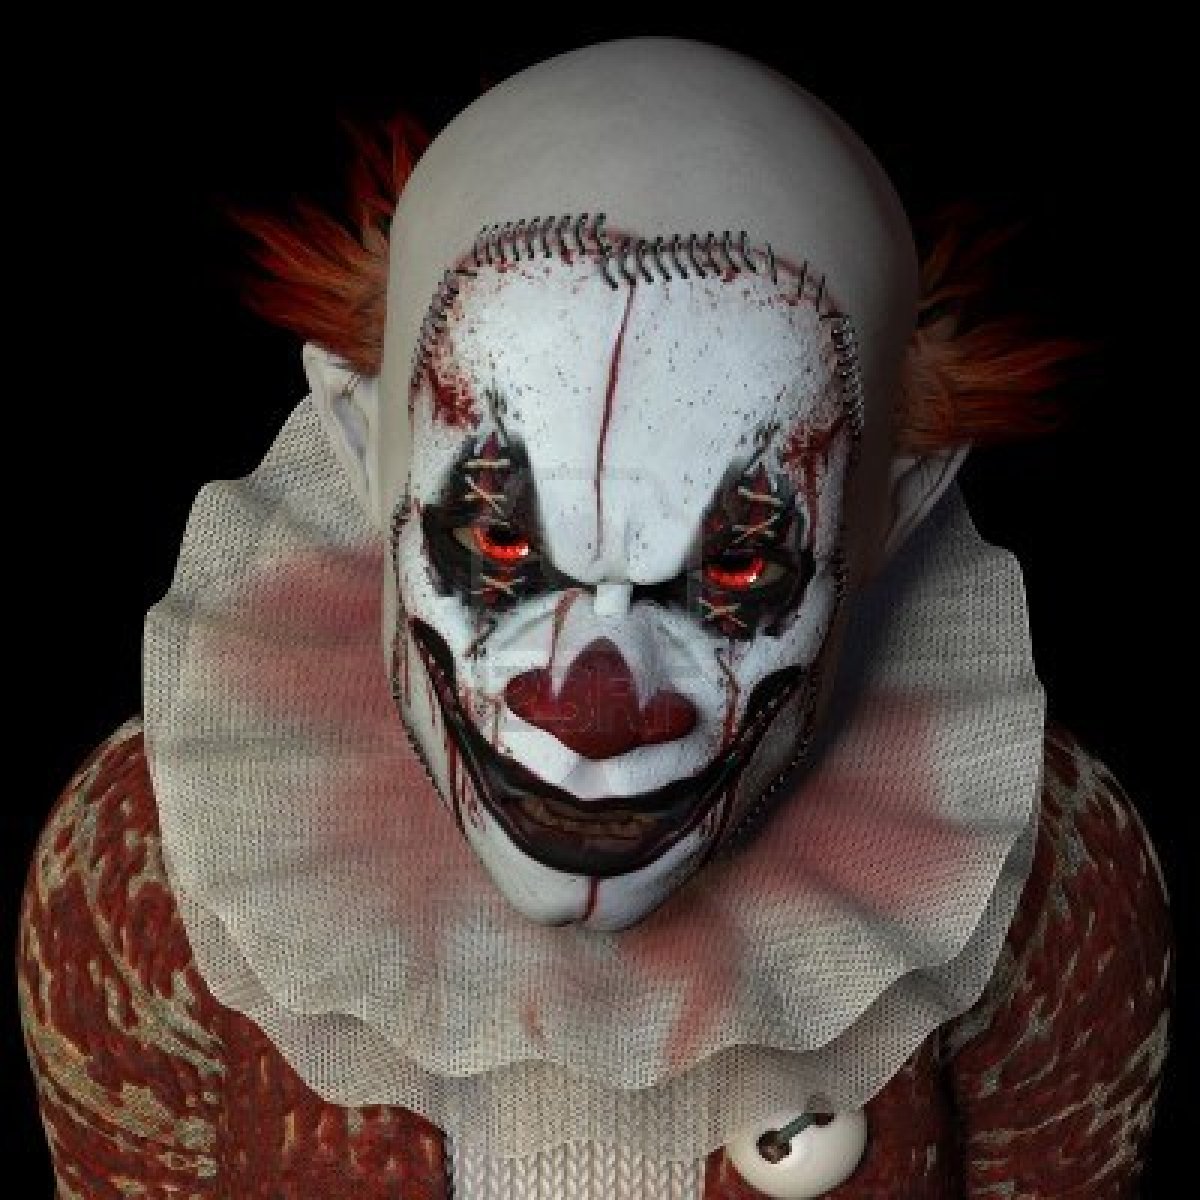 15889856-scary-clown-glaring-at-you-isolated-on-a-black-background.jpg